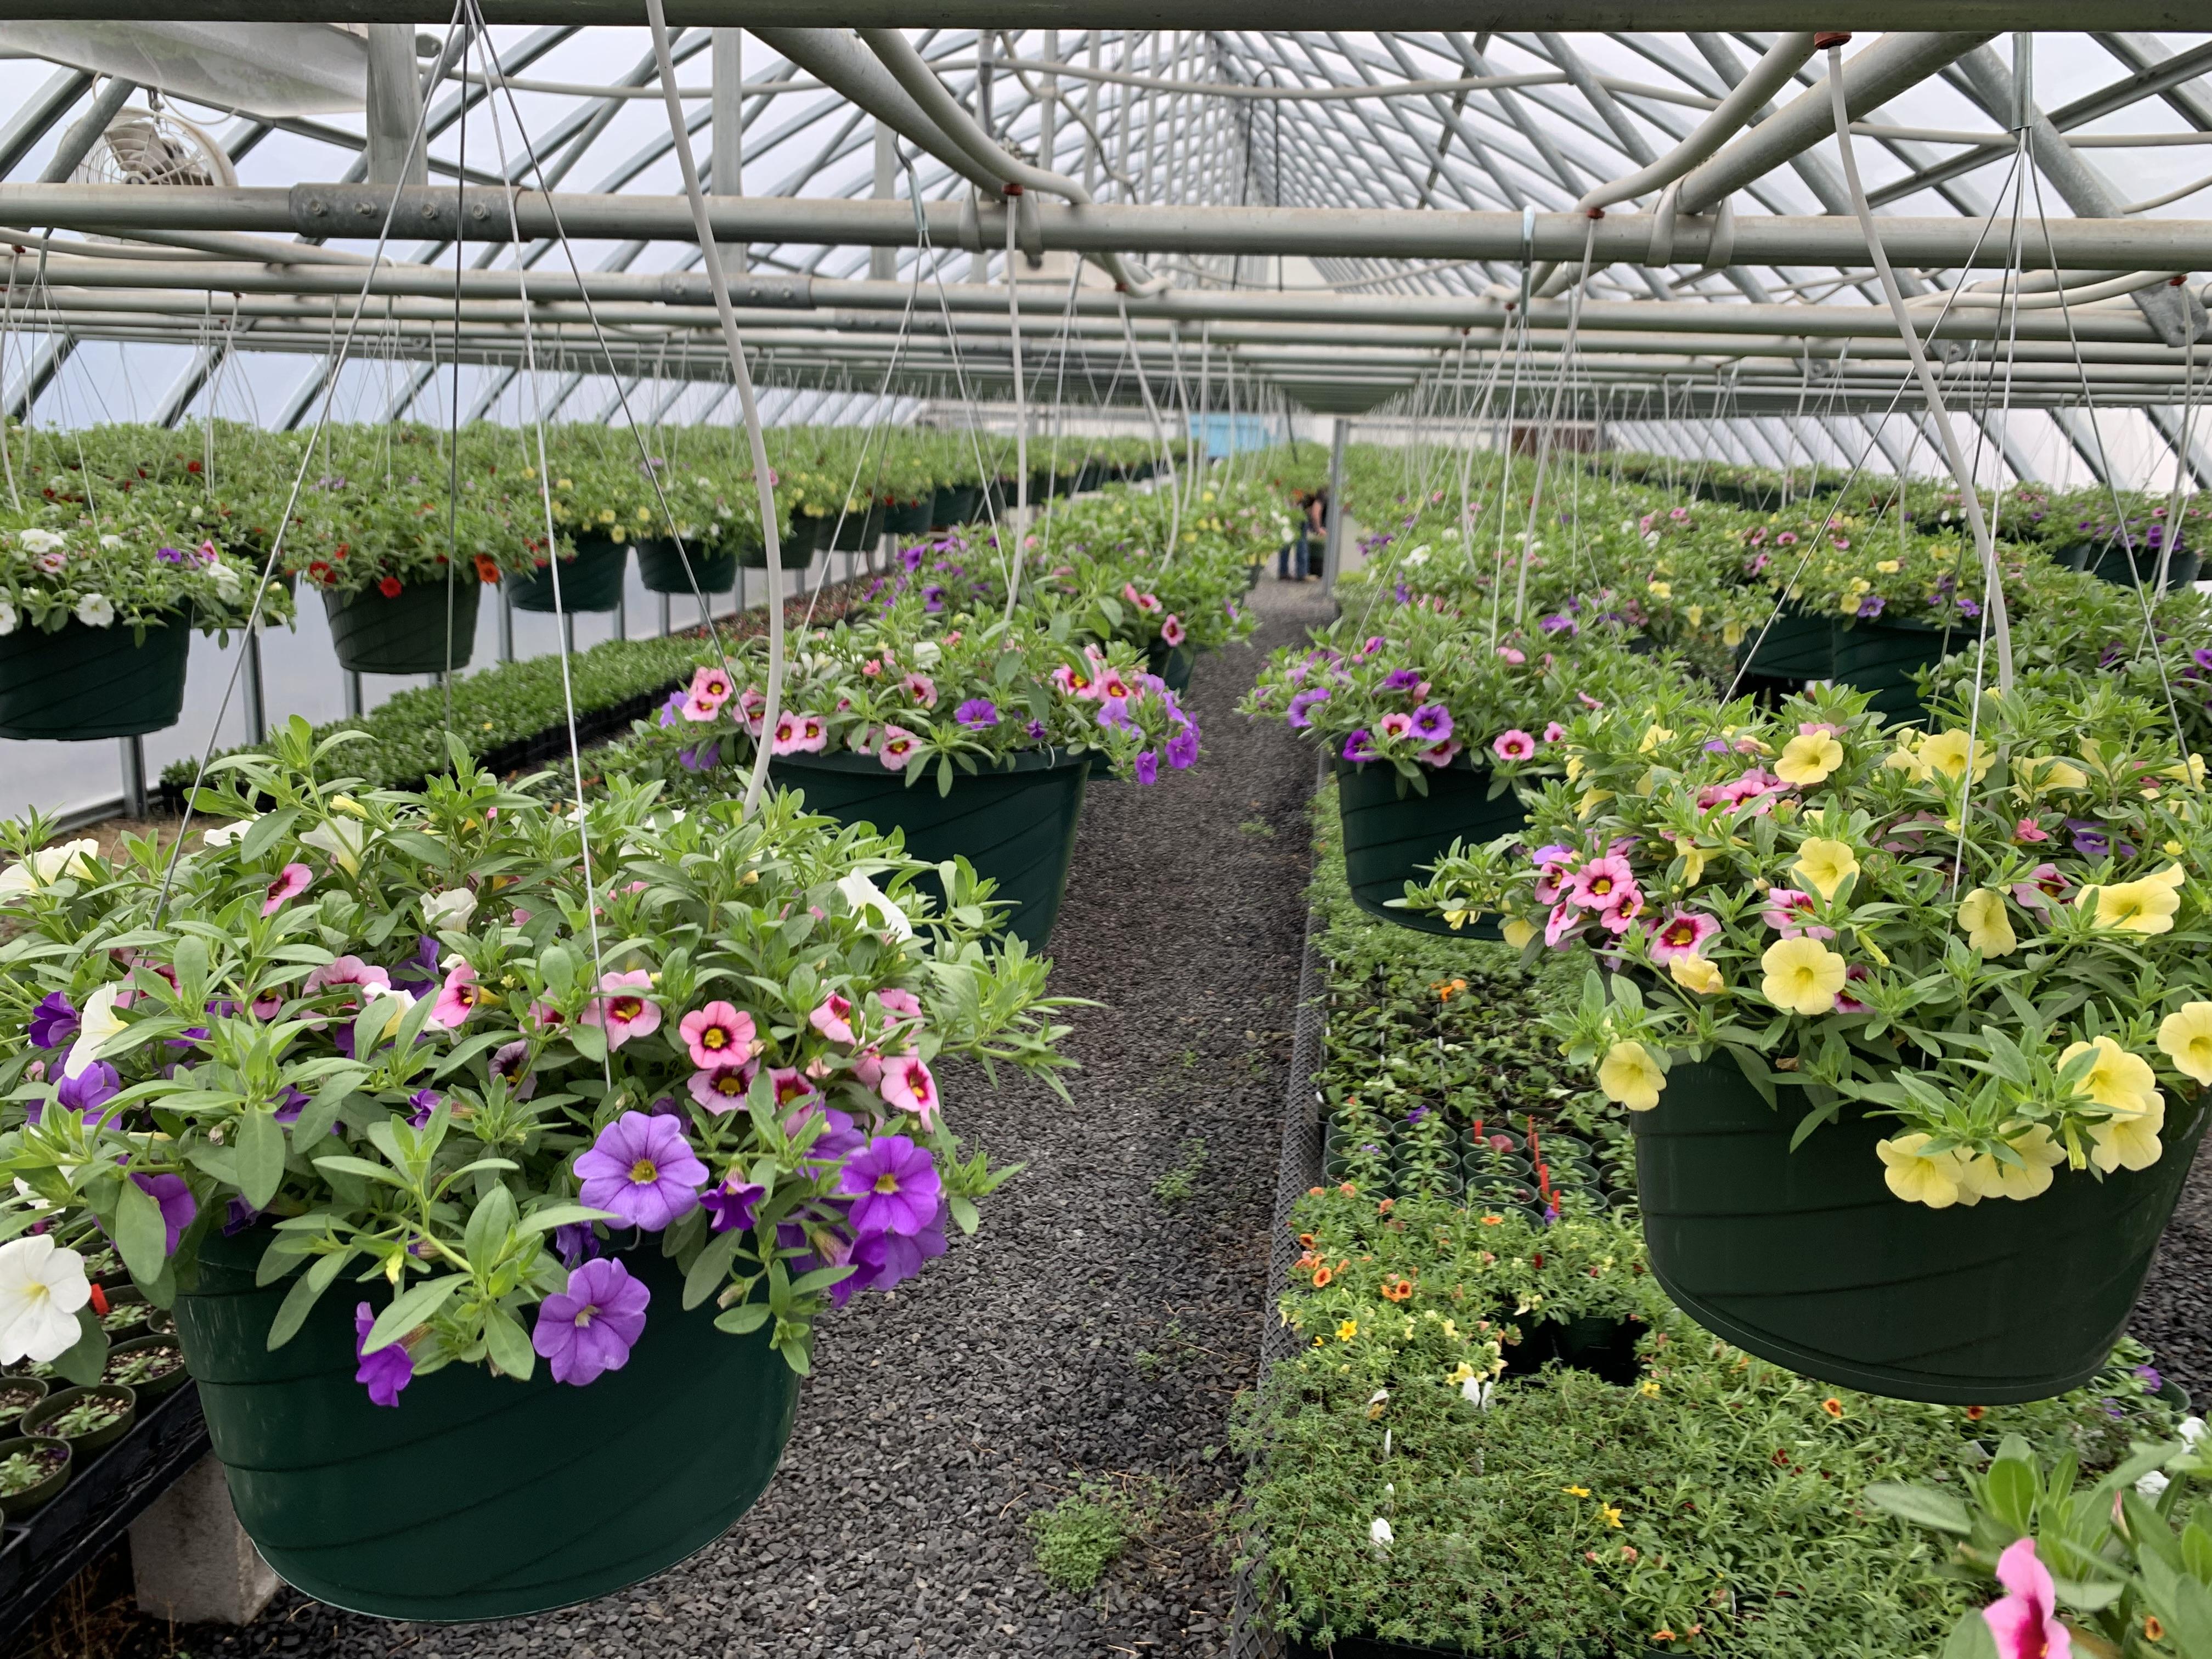 Rows of hanging petunia flower baskets